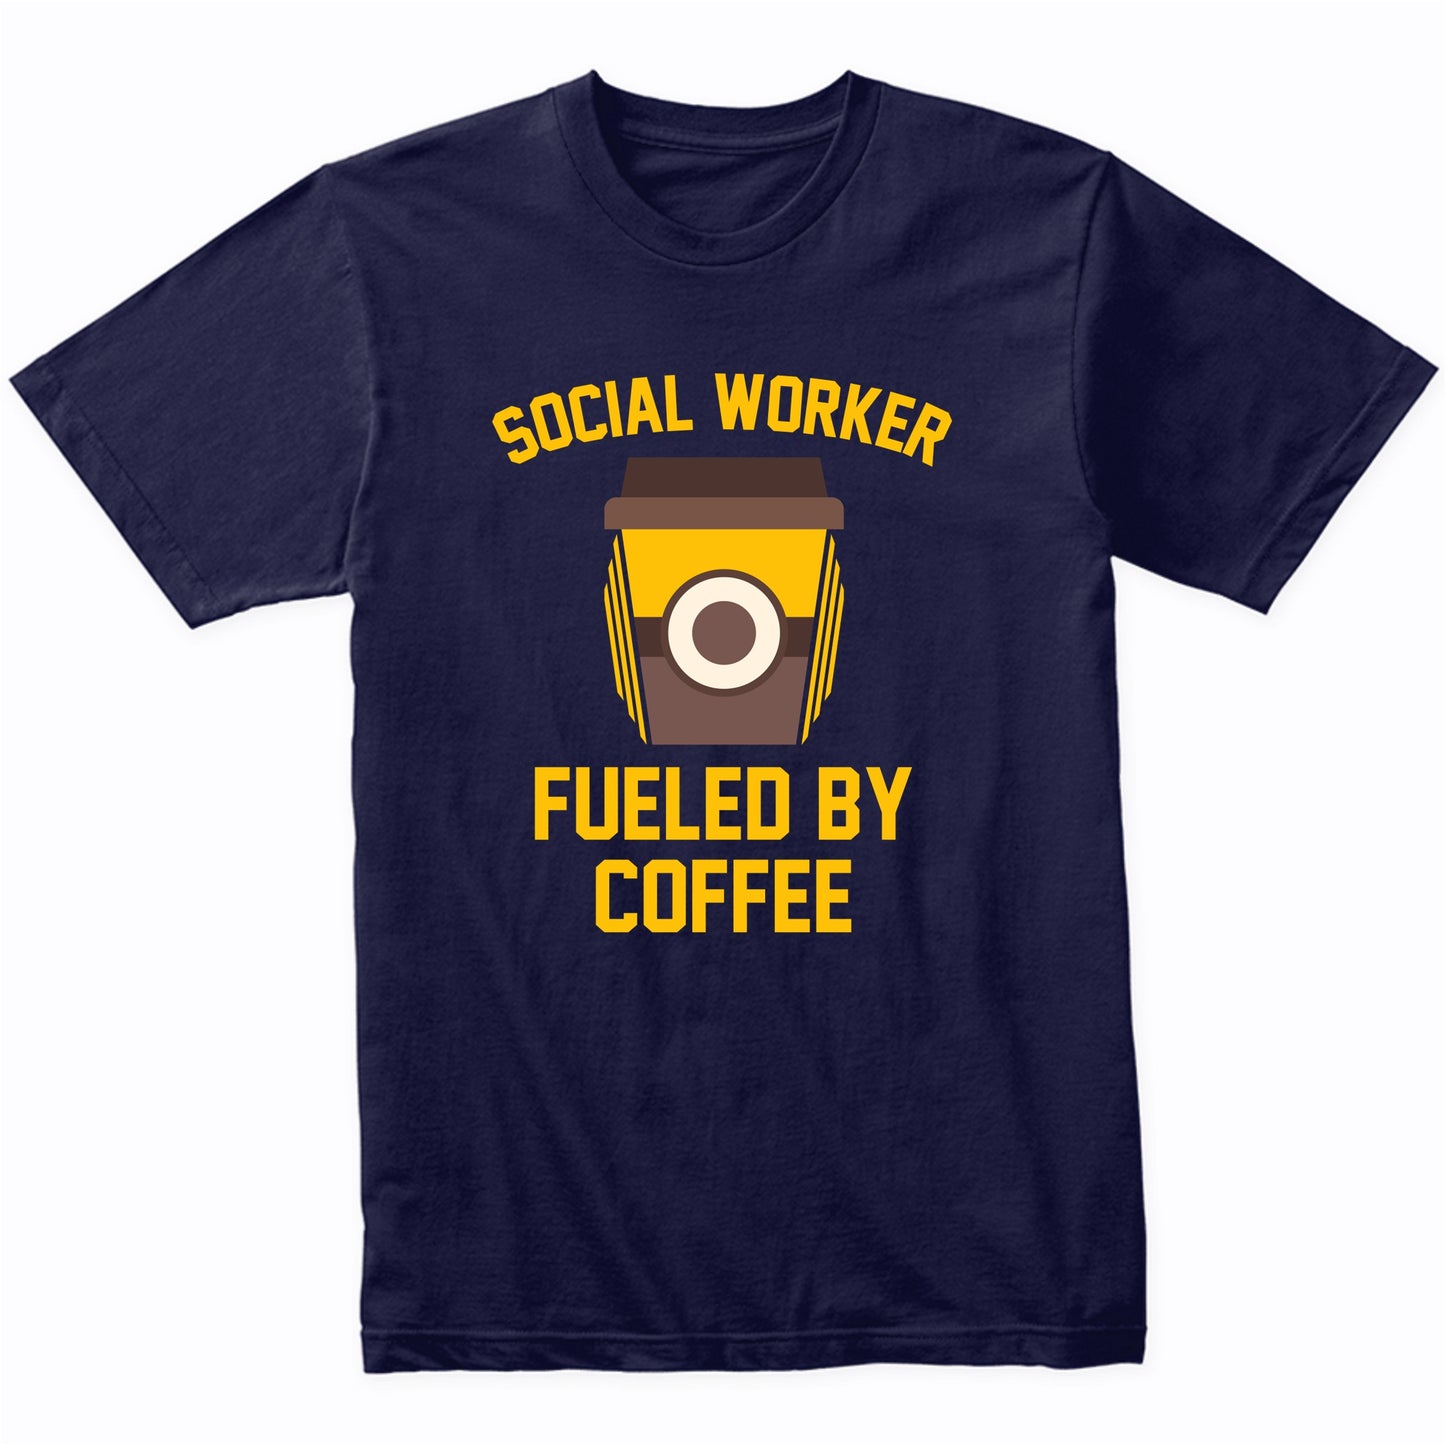 Social Worker Fueled By Coffee Funny Shirt